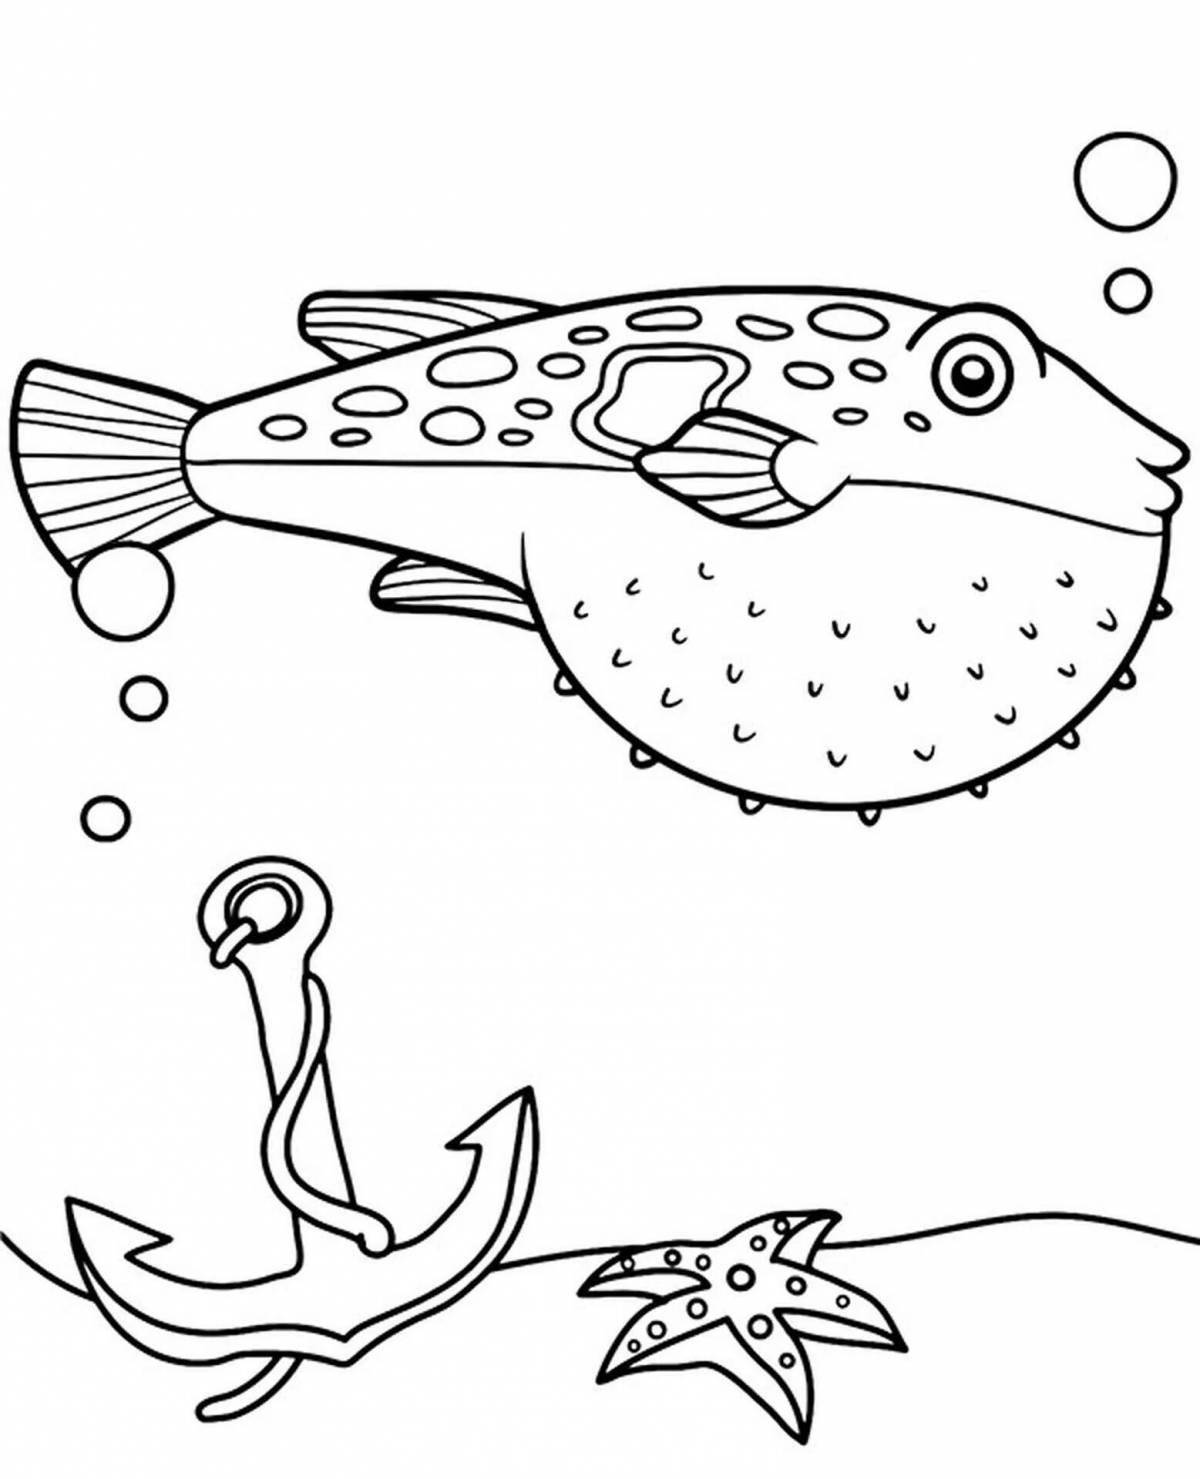 Coloring page adorable puffer fish